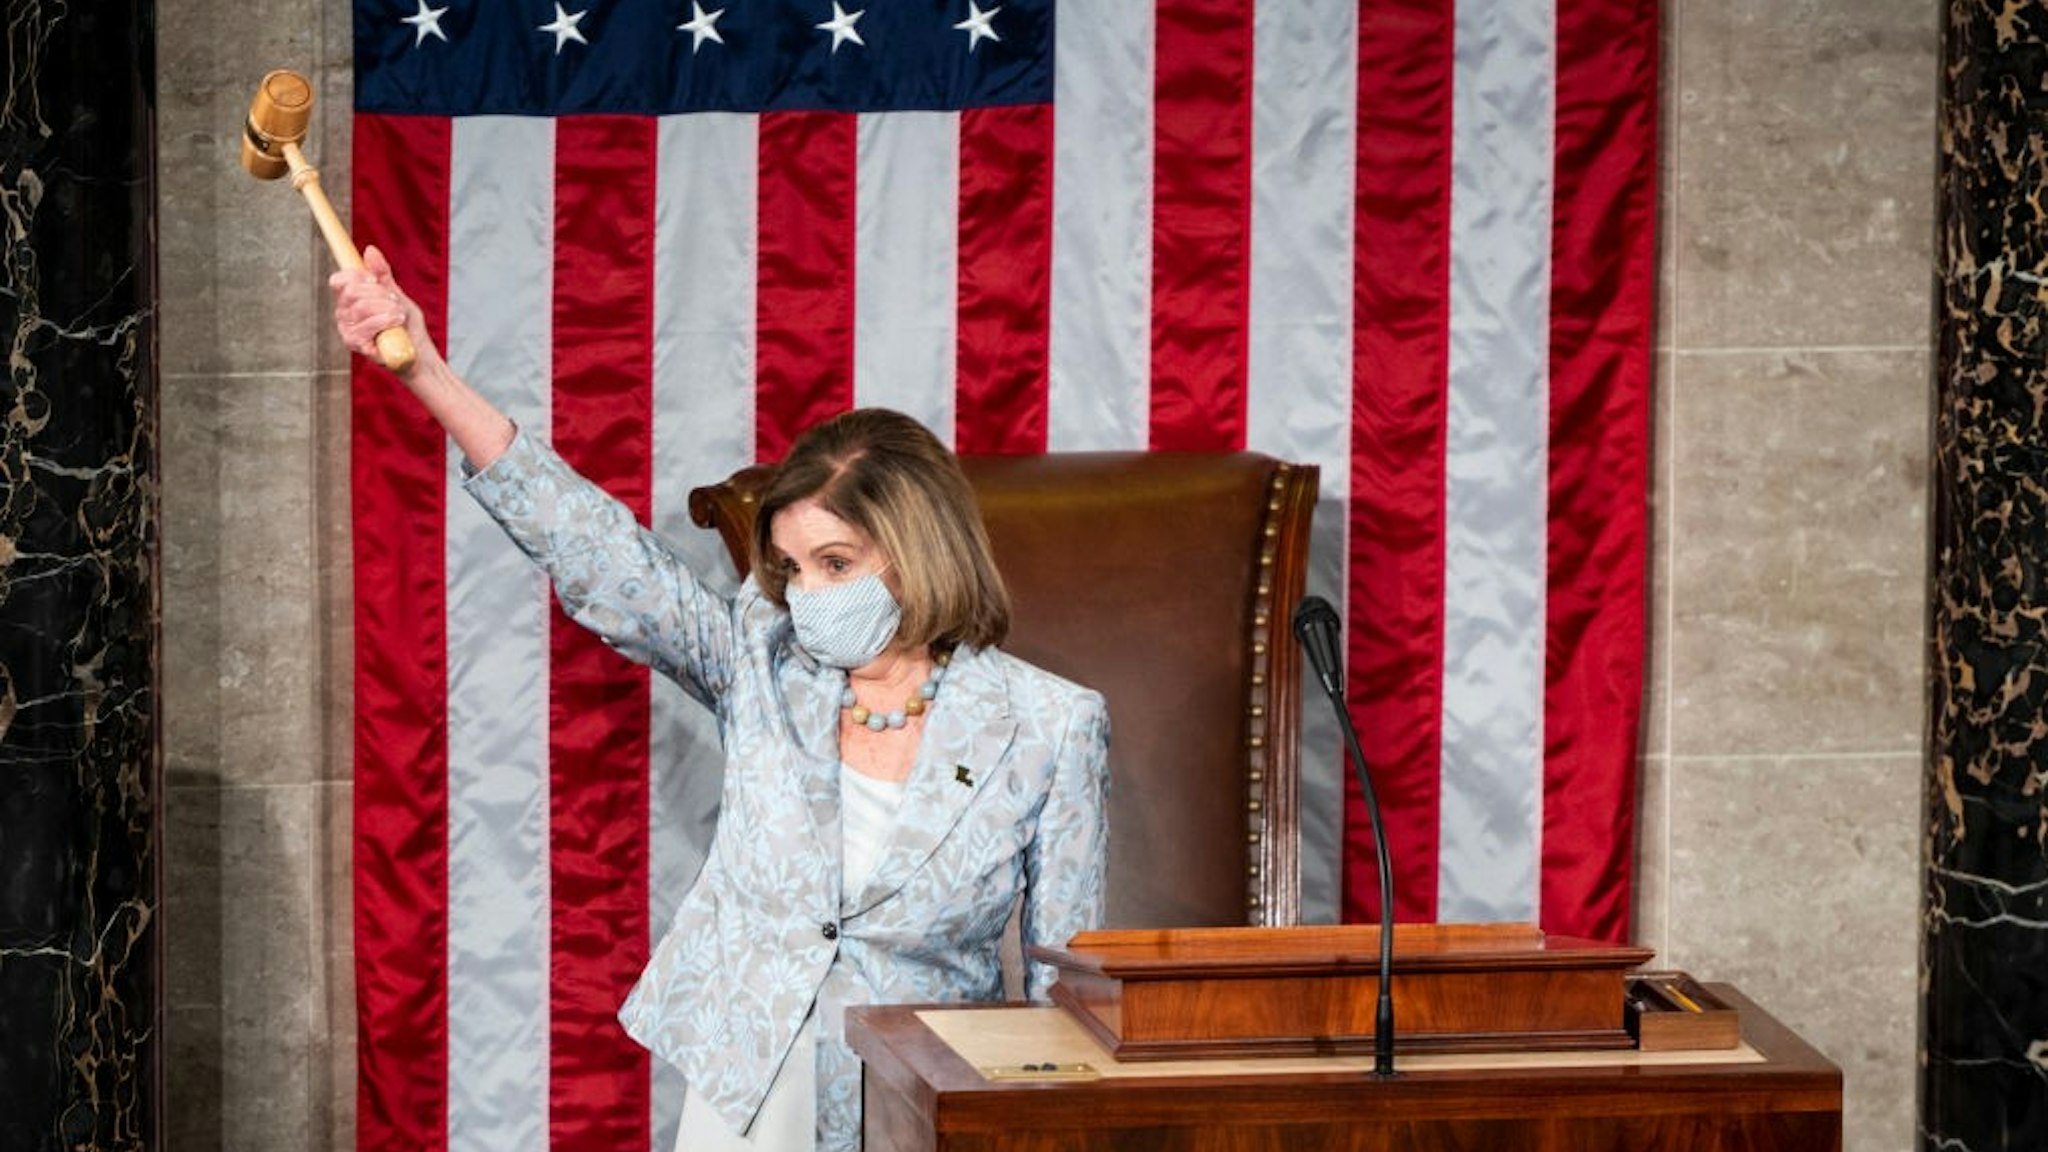 WASHINGTON, DC - JANUARY 3: Speaker of the House Nancy Pelosi (D-CA) holds the Speakers gavel in the air on the House floor in the Capitol after becoming Speaker of the 117th Congress on January 3, 2021 in Washington, DC. Both chambers are holding rare Sunday sessions to open the new Congress on January 3 as the Constitution requires. (Photo By